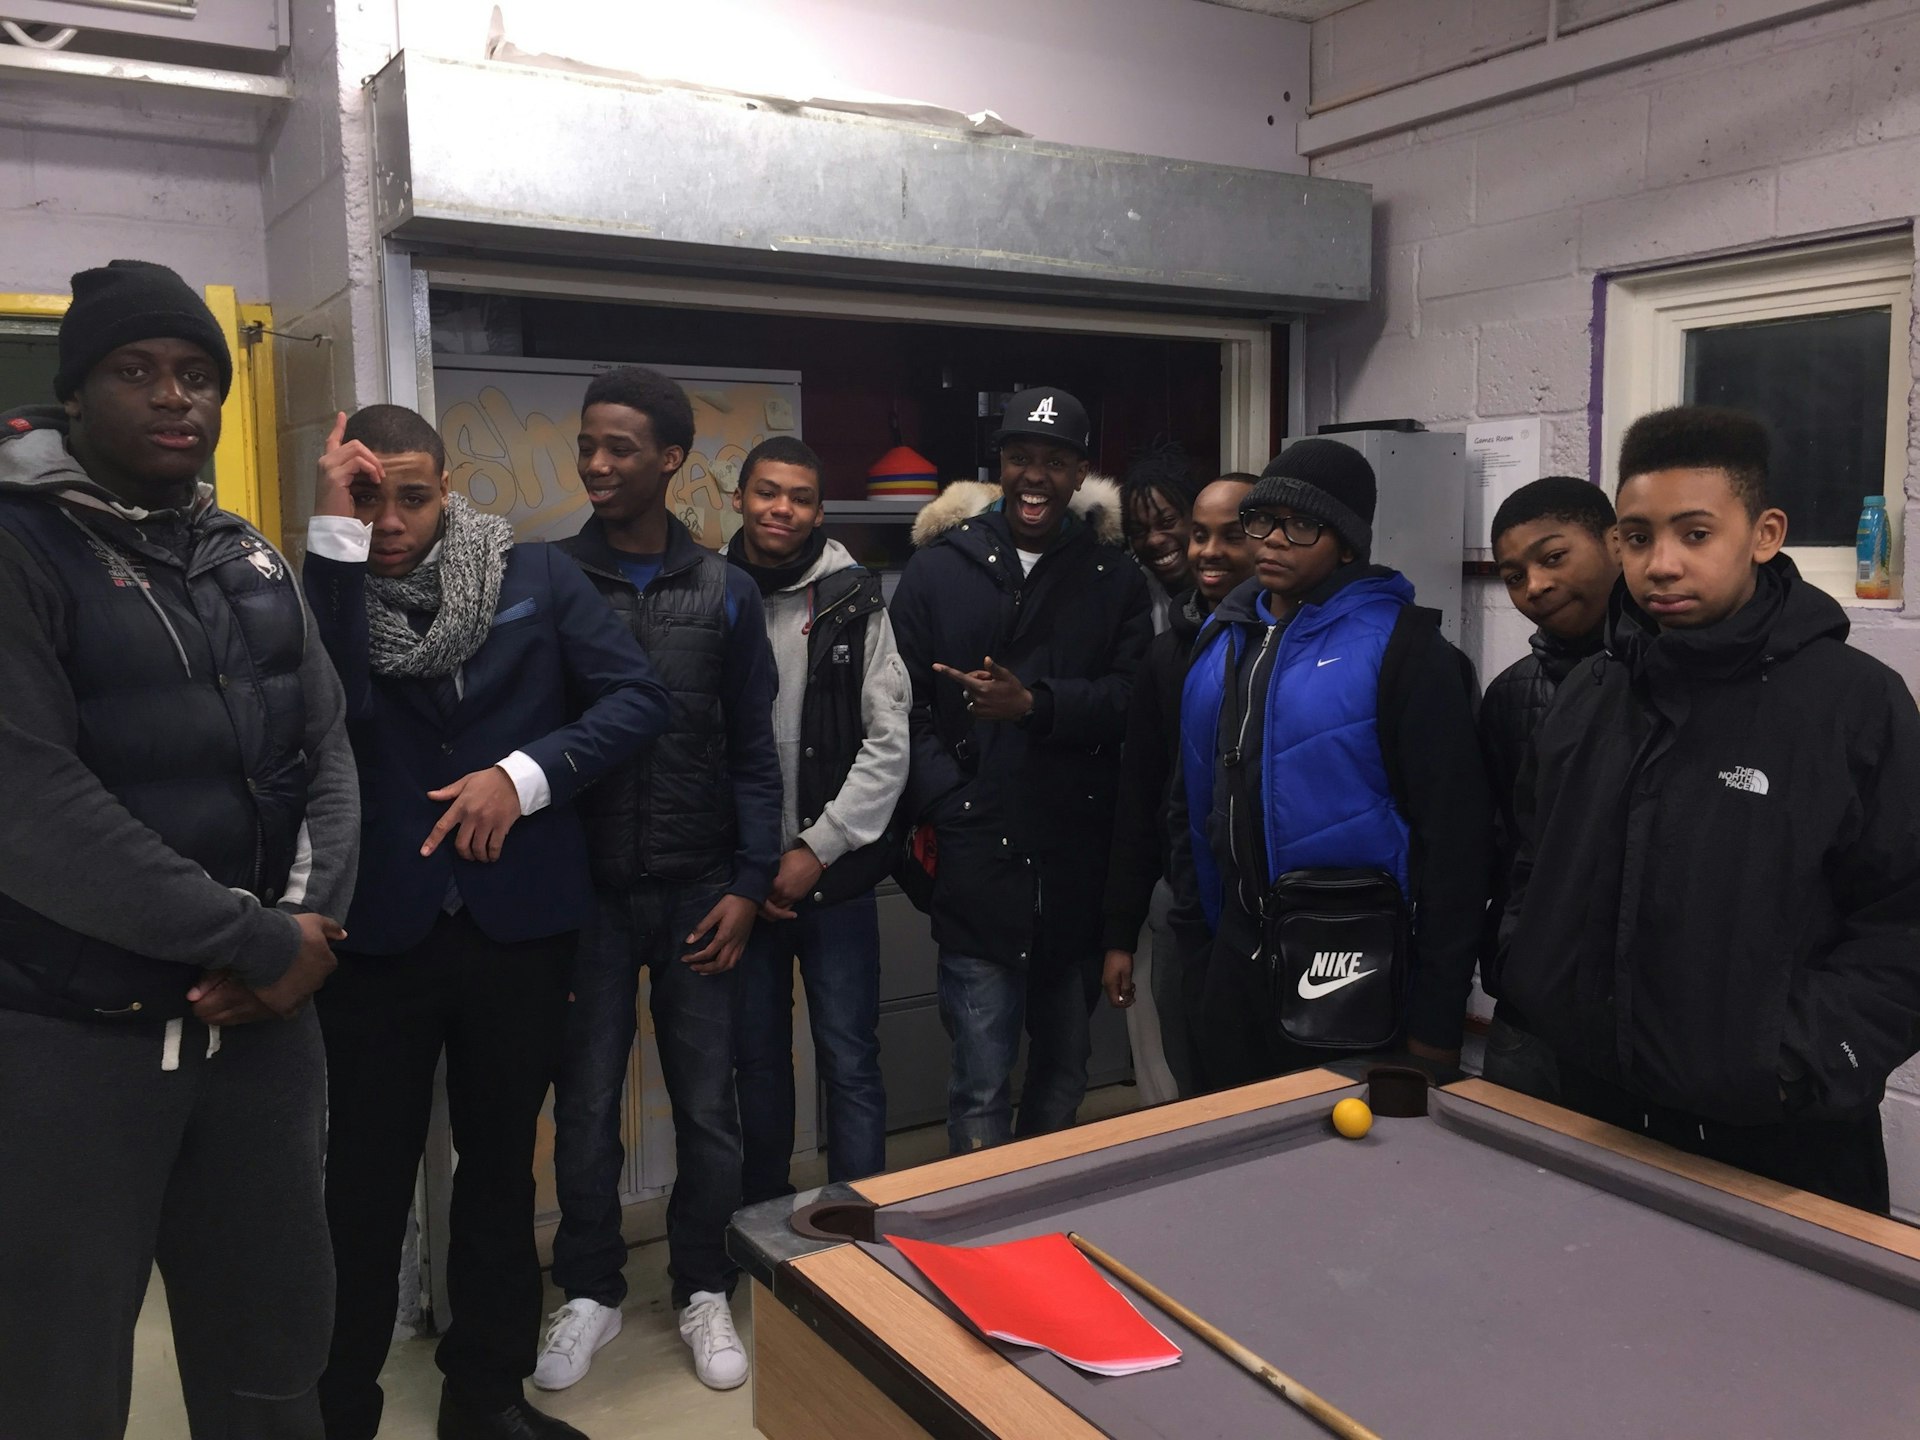 This youth football club is breaking barriers and uniting London neighbourhoods